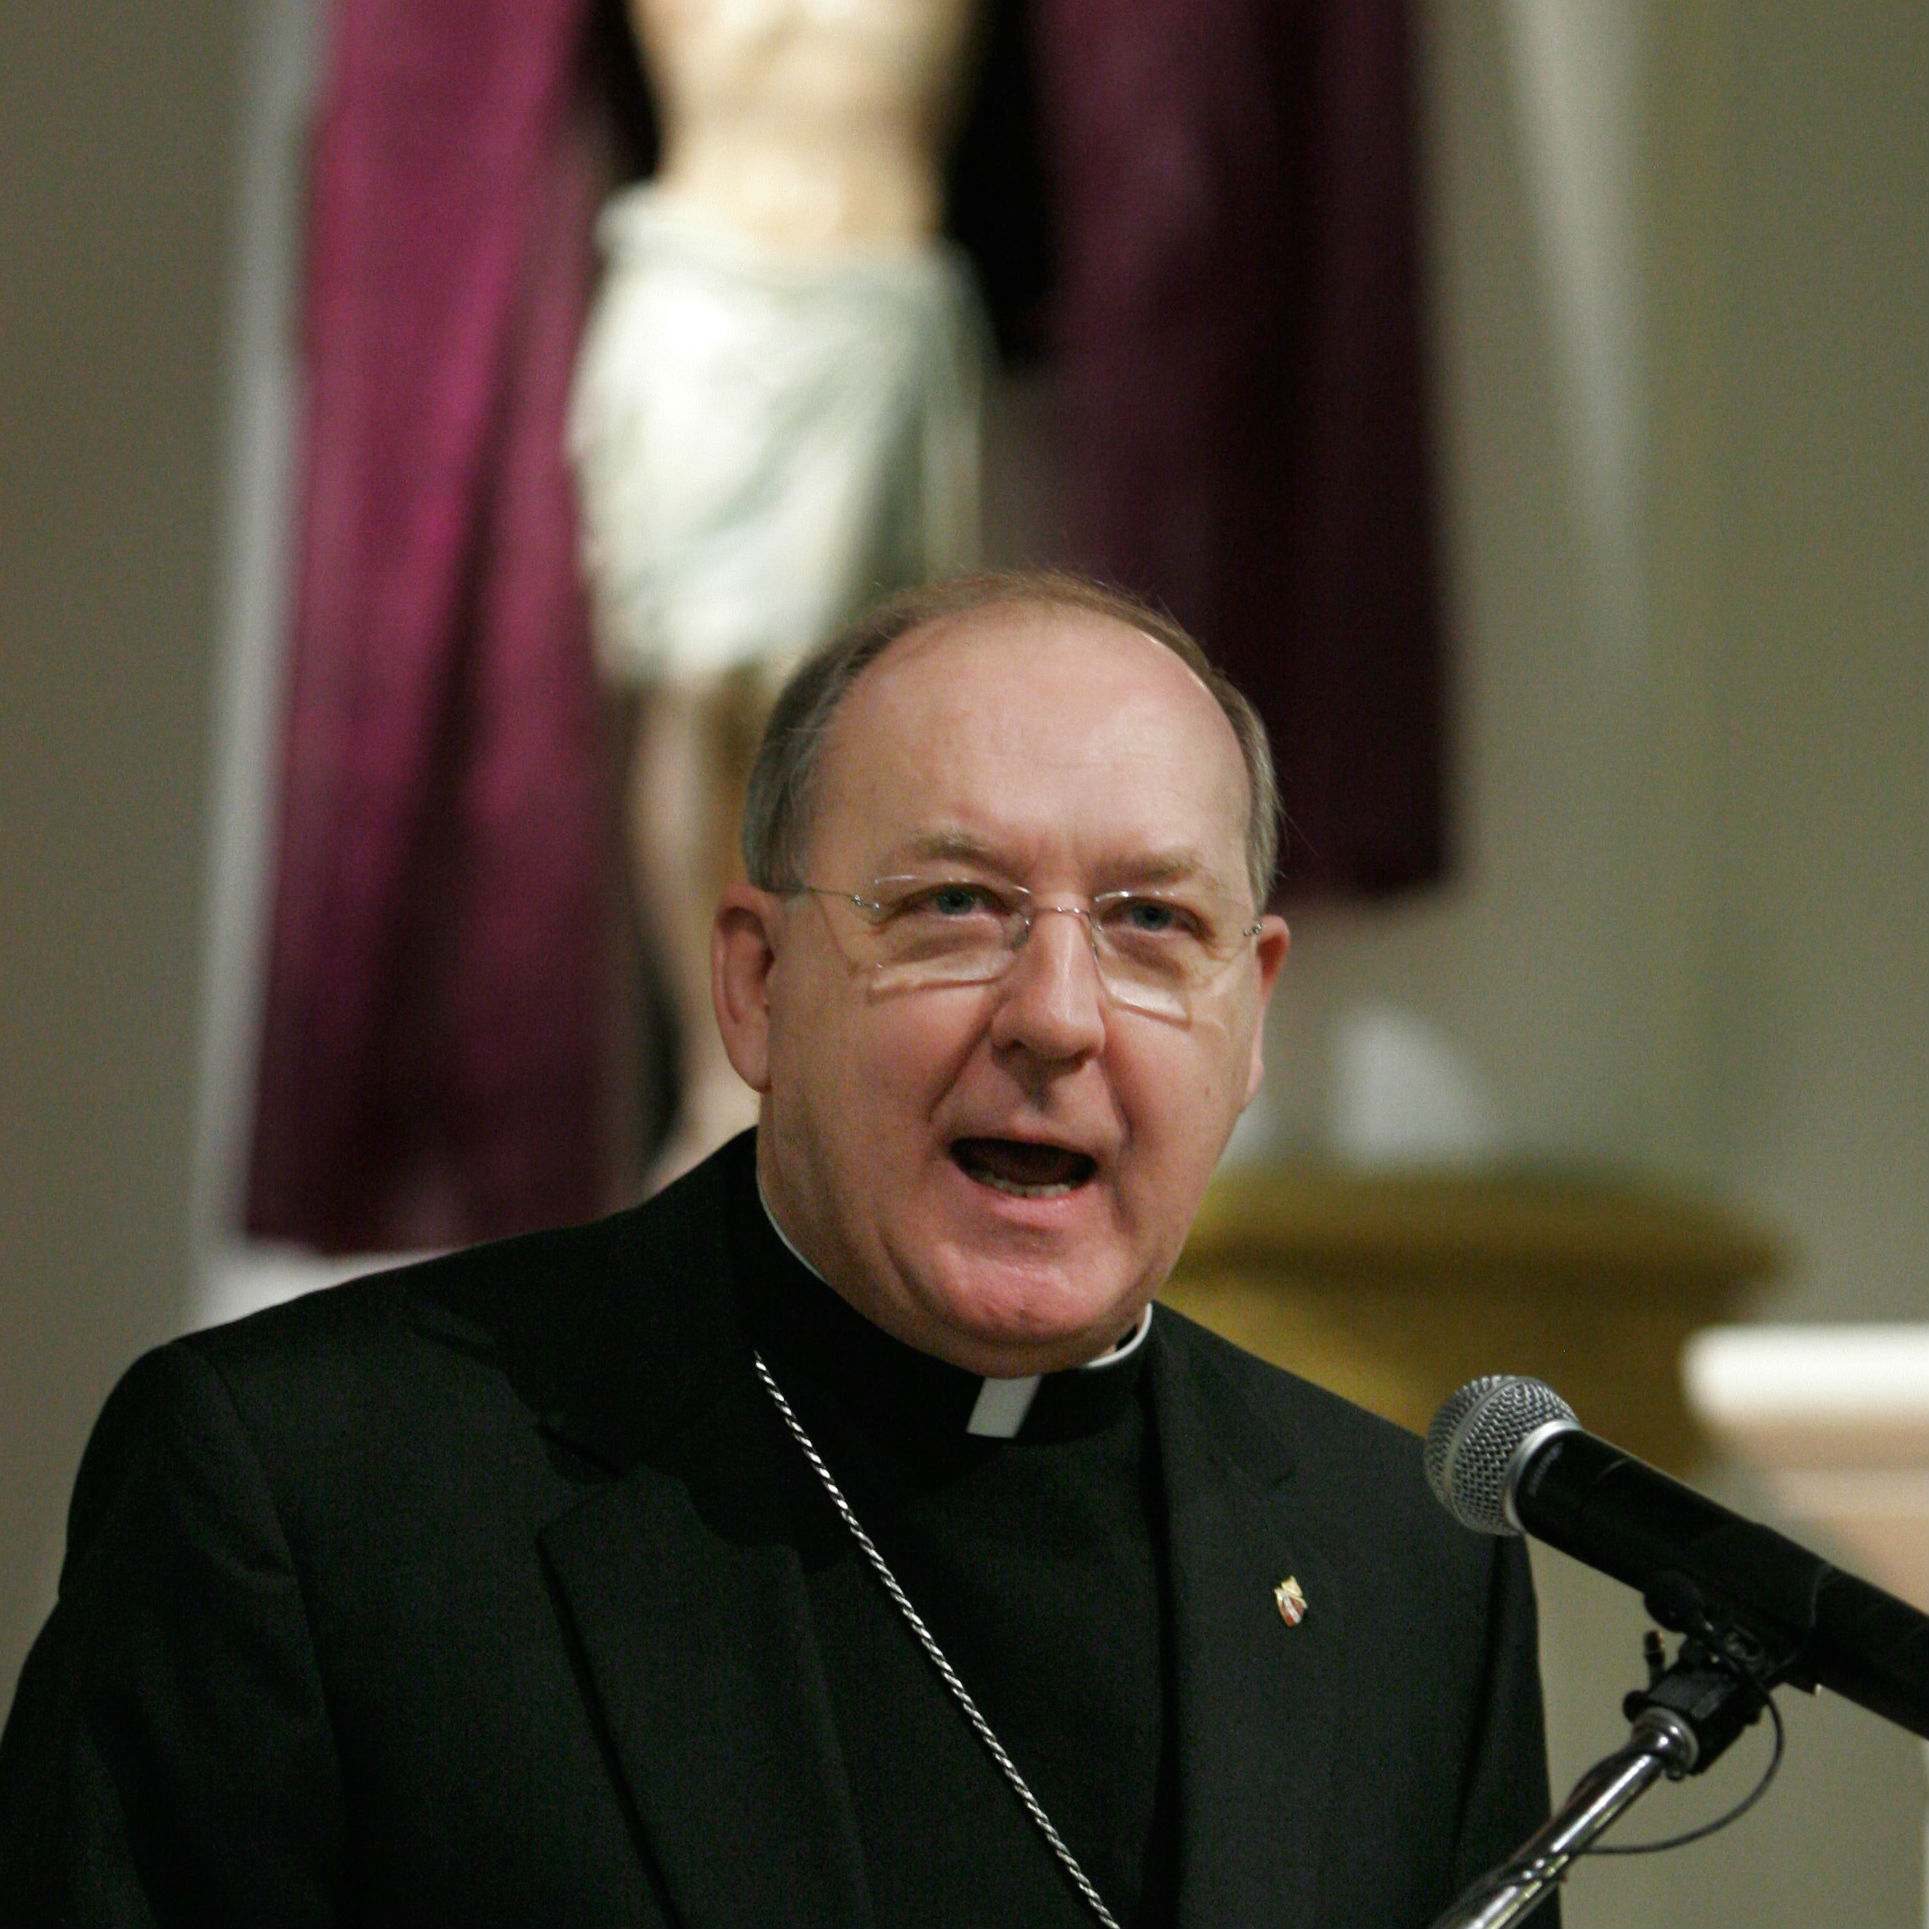 Profile: Bishop Kevin Farrell - new head of Vatican dicastery of family, marriage and the laity